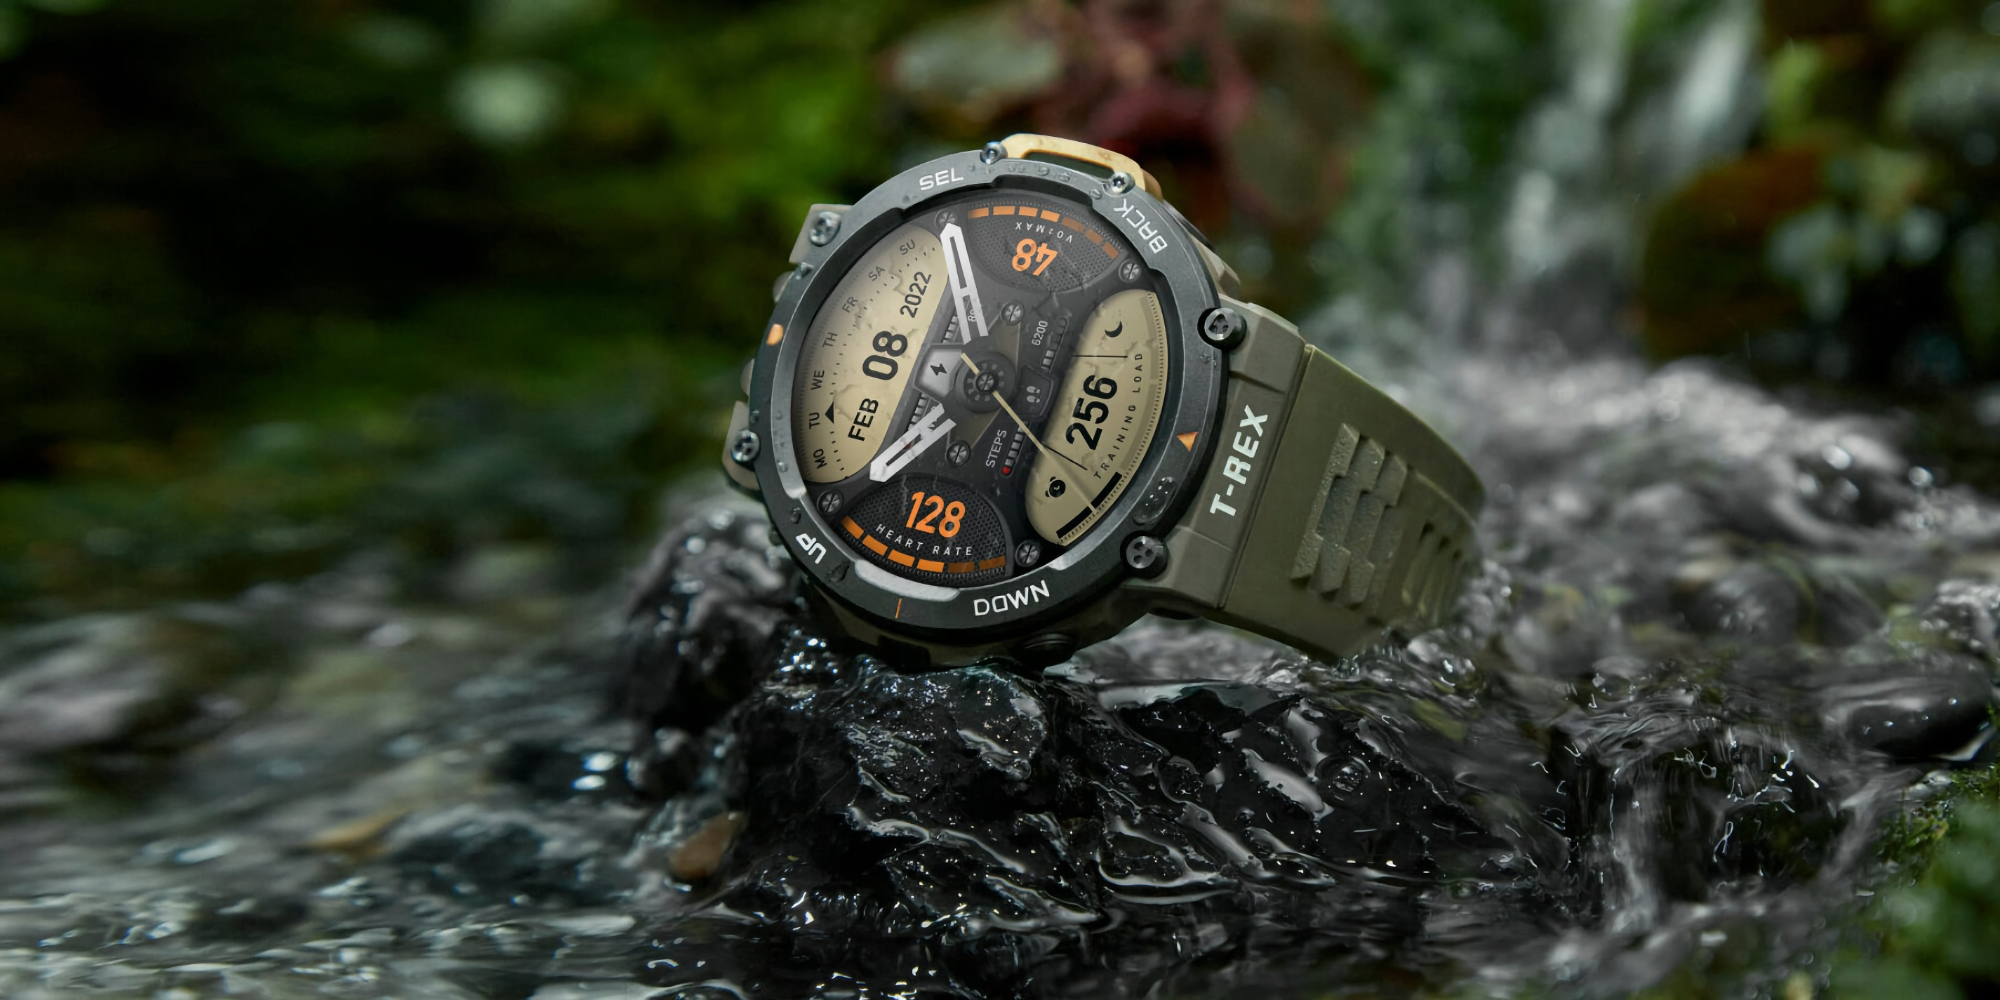 The Amazfit T-Rex 2 rugged smartwatch with up to 45 days of battery life  and support for 5 global satellite positioning systems is available at   for a discount